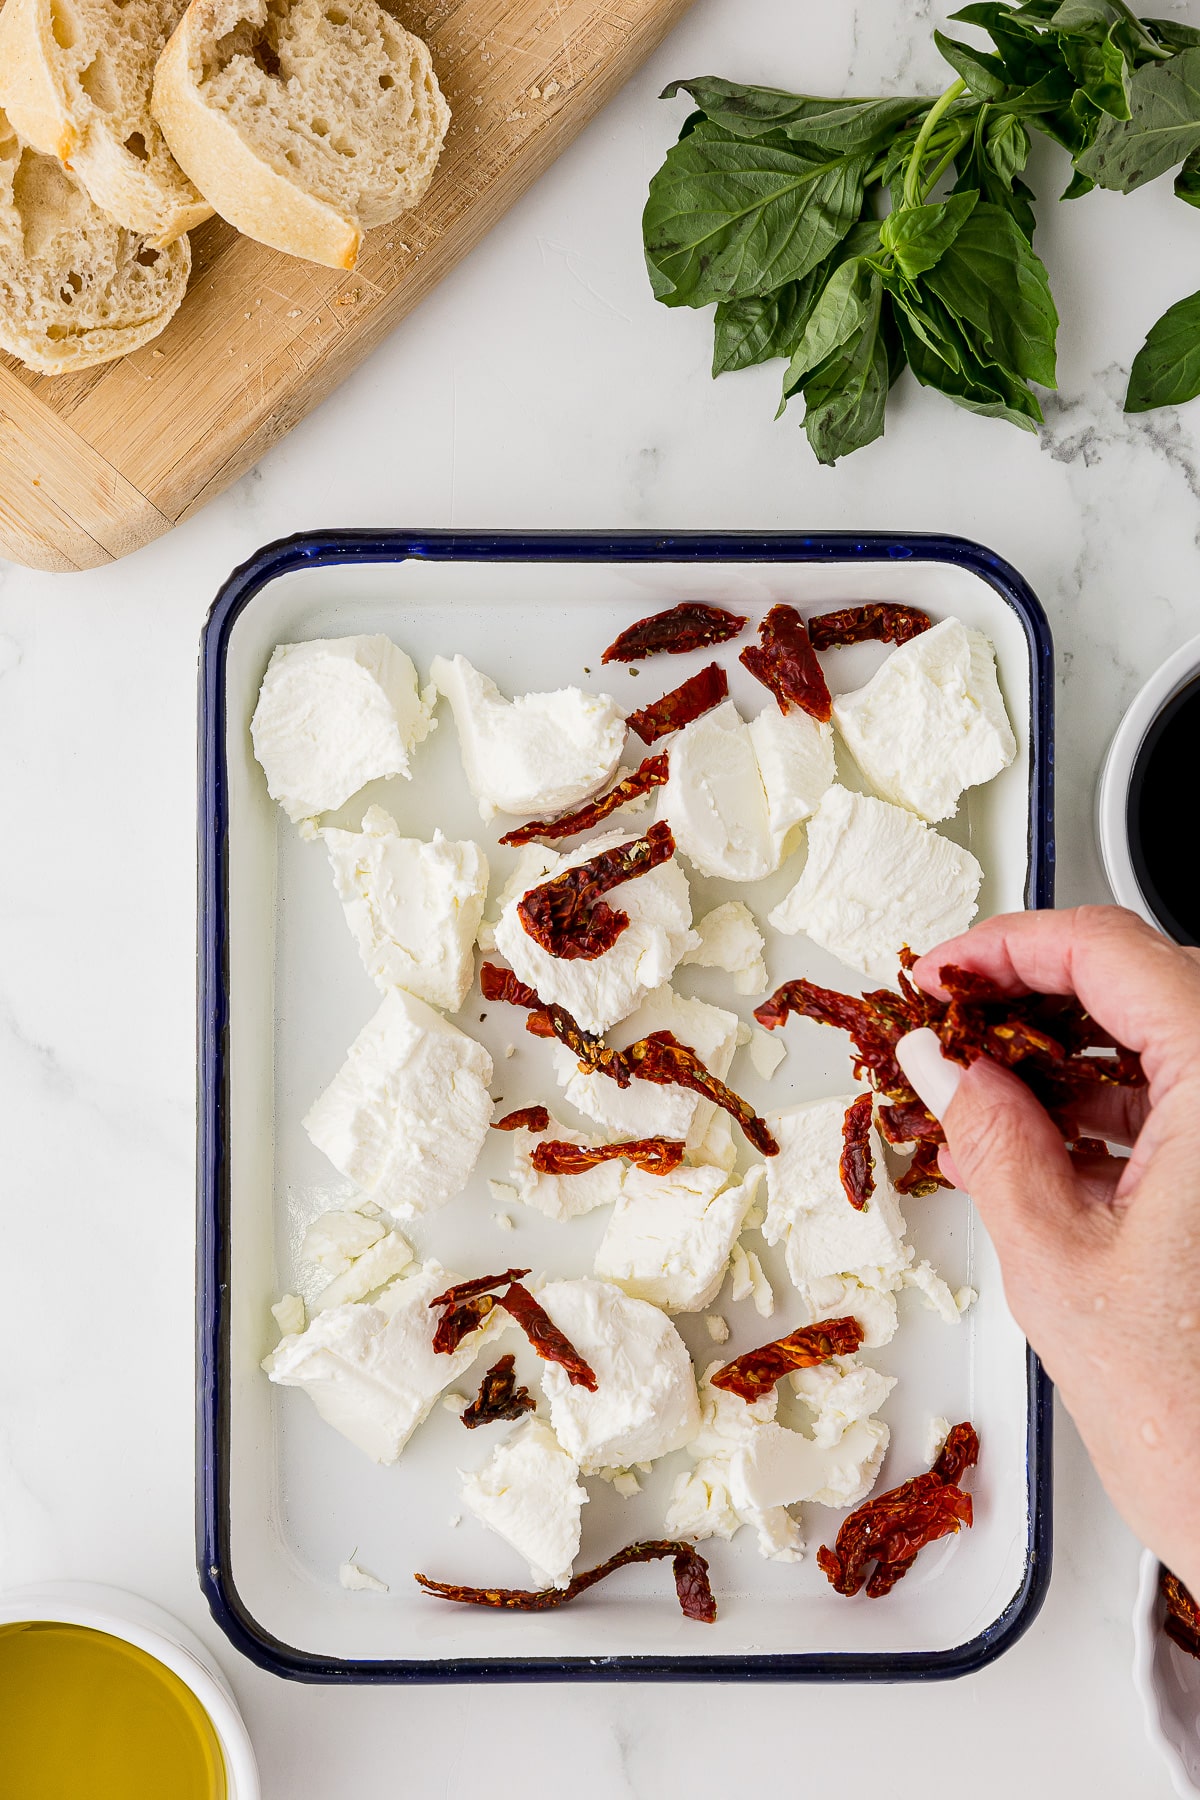 sprinkling sun-dried tomato strips over goat cheese